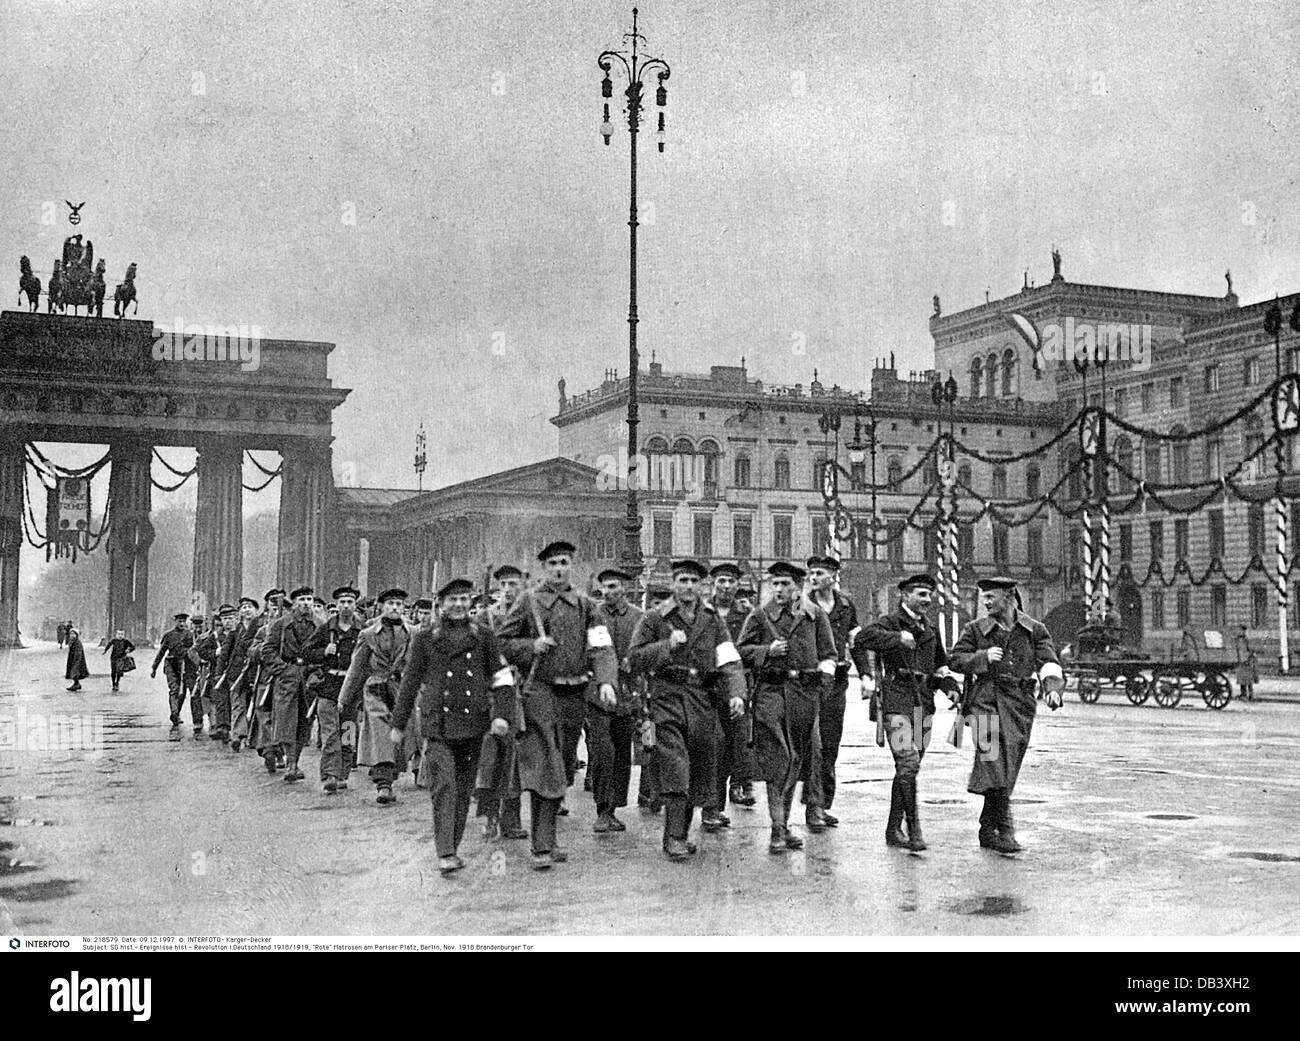 event, German revolution 1918/1919, 'Red' sailors on Pariser Platz, Berlin, November 1918, Additional-Rights-Clearences-Not Available Stock Photo